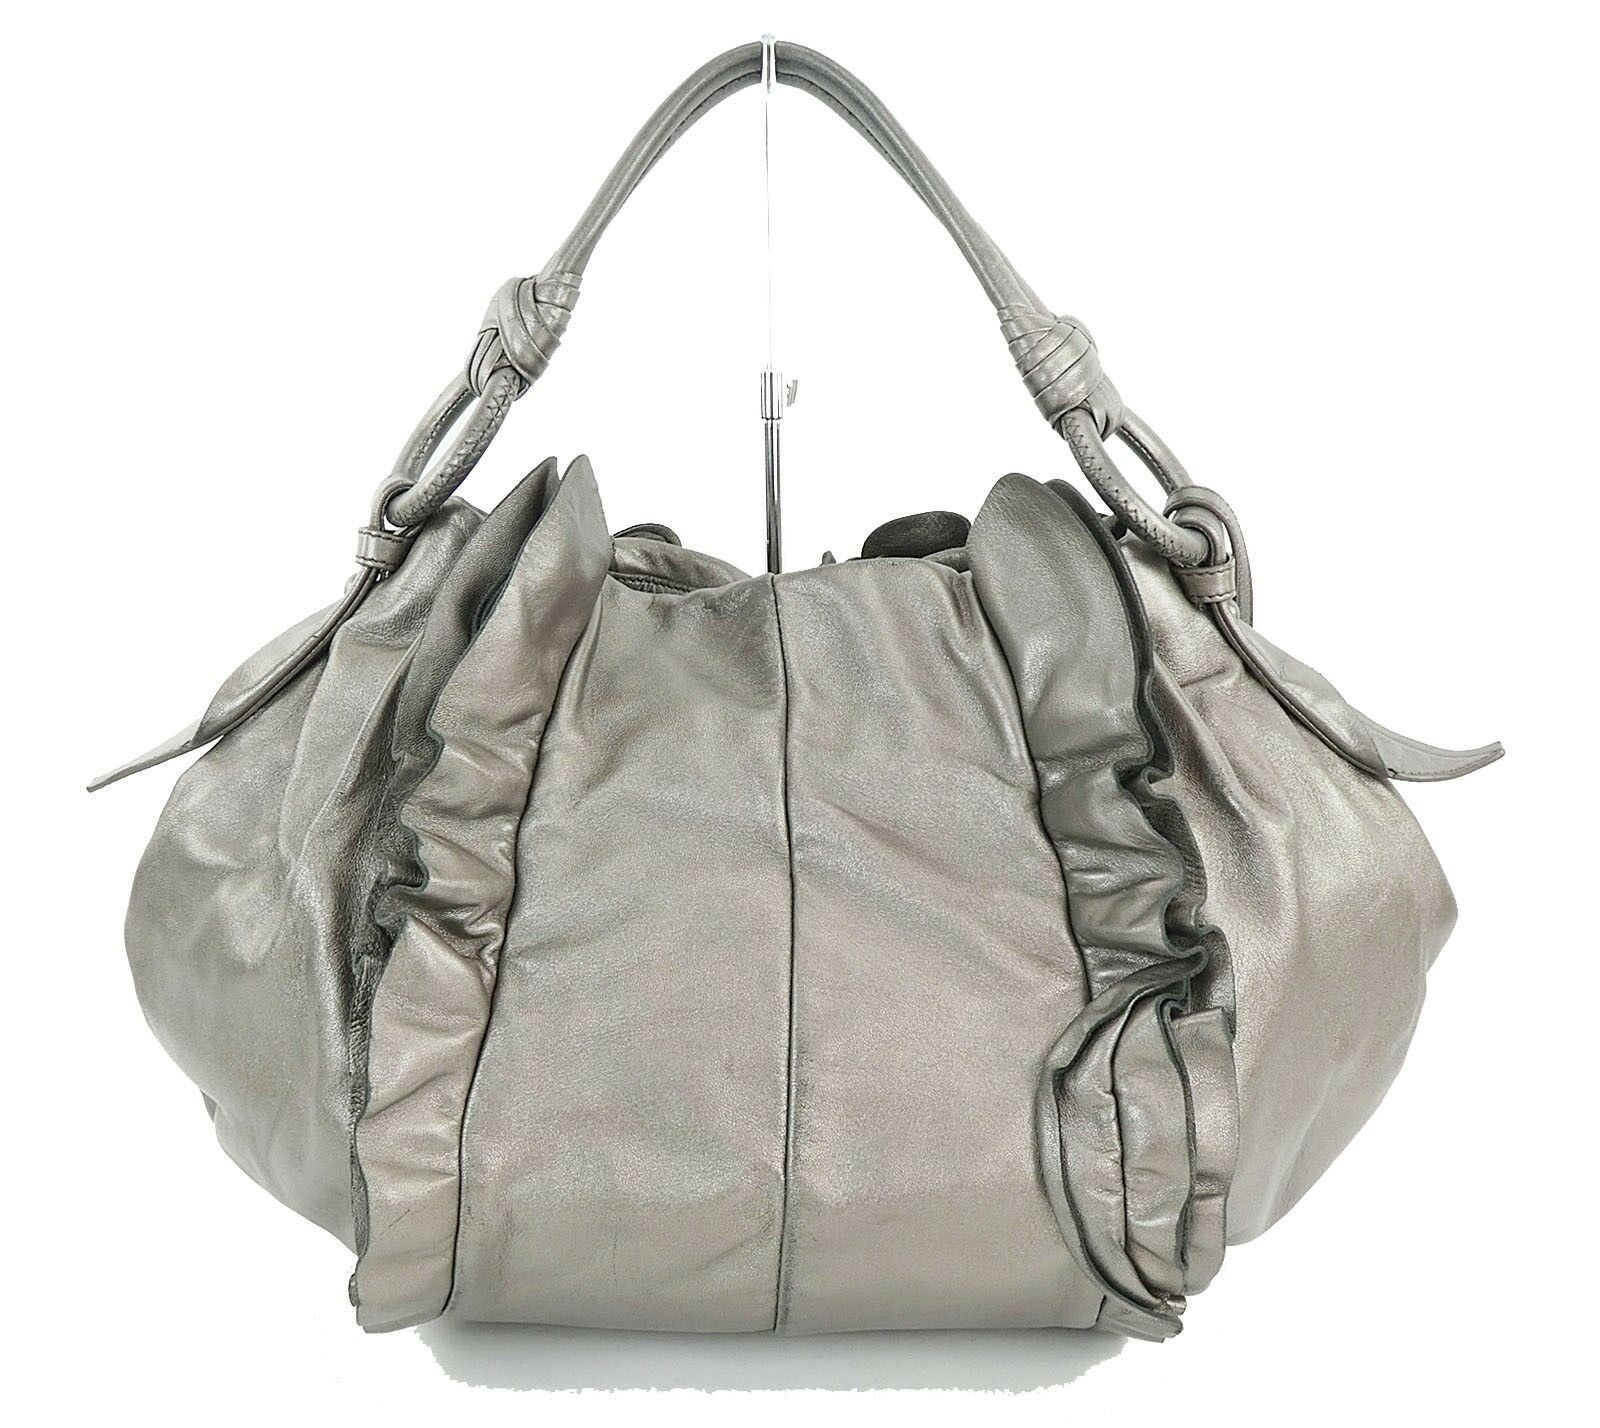 Authentic PRADA Silver Leather Tote Hand Bag Purse #29759 - Women's ...